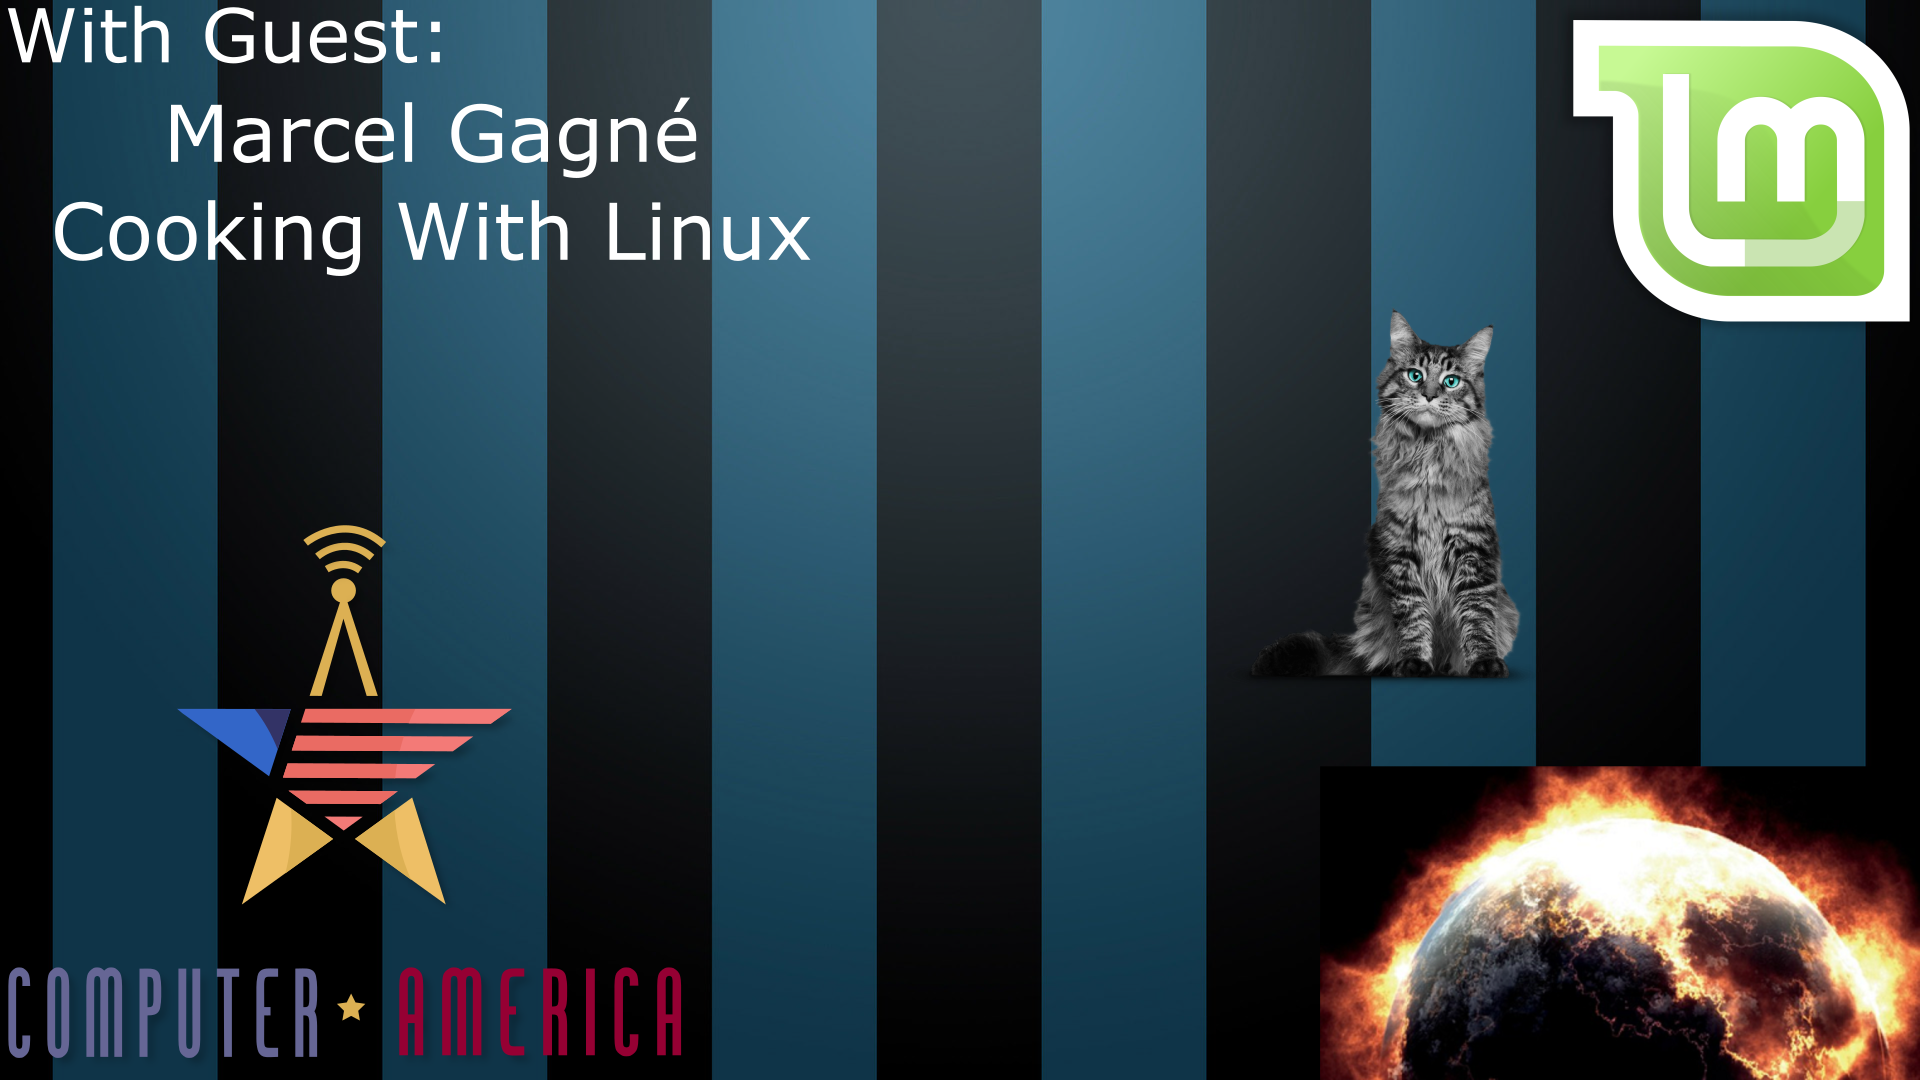 Joyous Solstice, Marcel Gagné’s Cooking With Linux For December!